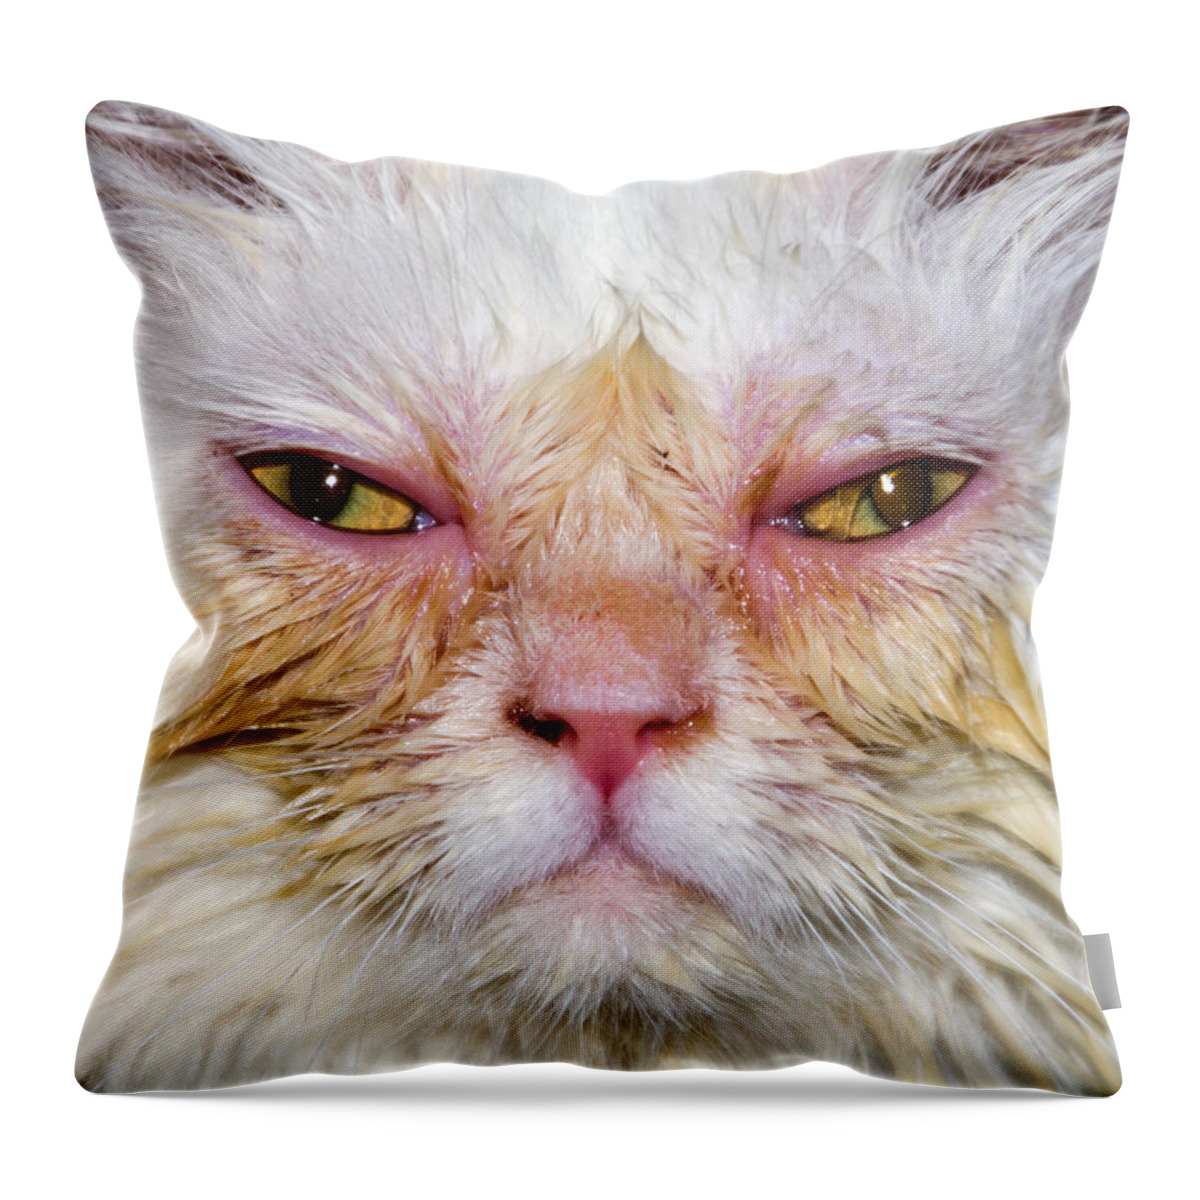 Scary Throw Pillow featuring the photograph Scary White Cat by Bob Slitzan